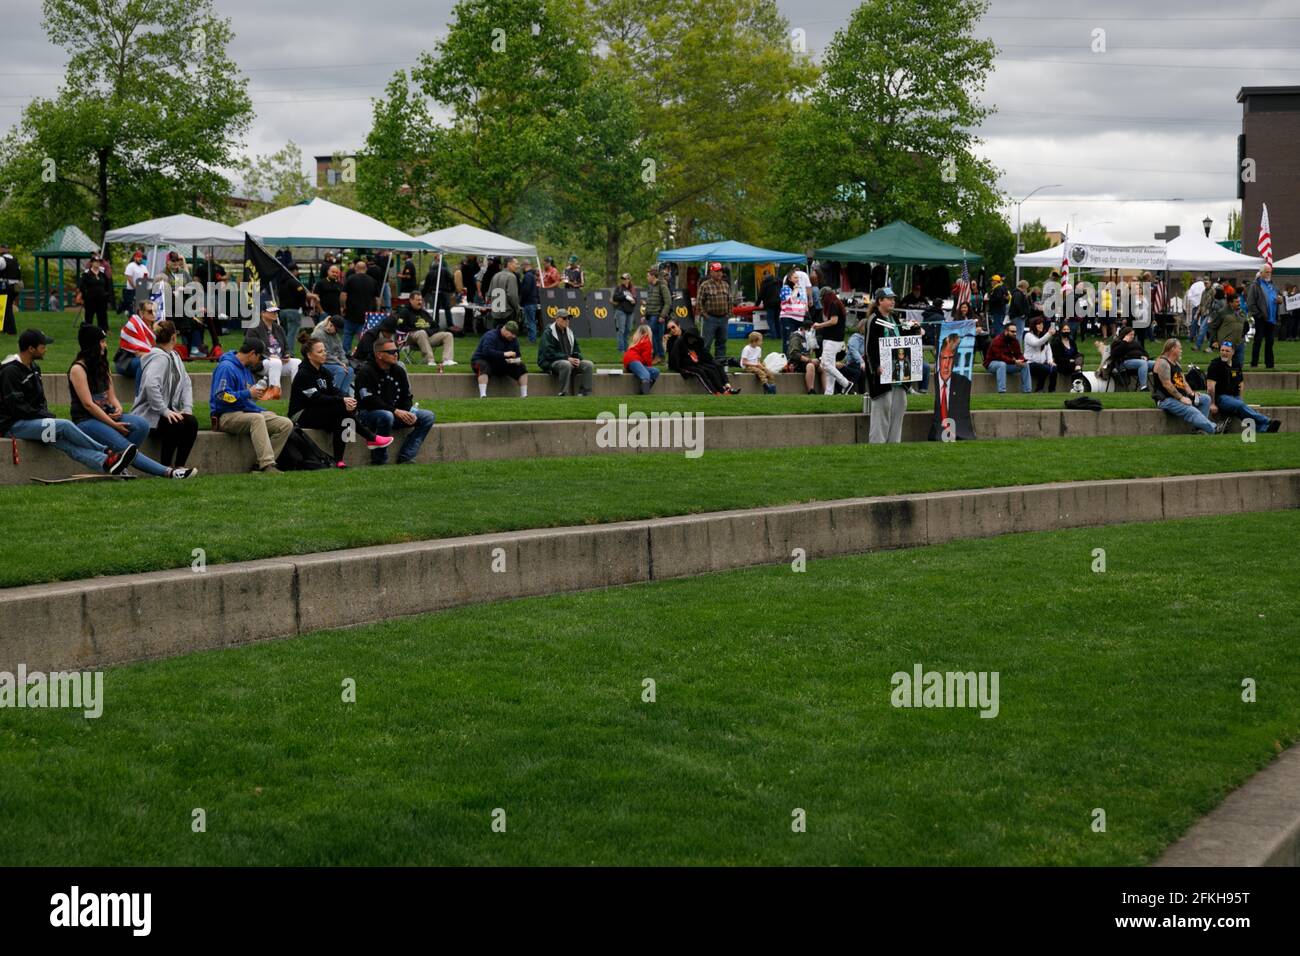 Salem, USA. 01st May, 2021. A rally for far-right conservative causes, gun rights and the Second Amendment, and Donald Trump, drew about 200-300 supporters, including a large contingent of Proud Boys, to Riverfront Park in Salem, Oregon, on May 1, 2021. (Photo by John Rudoff/Sipa USA) Credit: Sipa USA/Alamy Live News Stock Photo